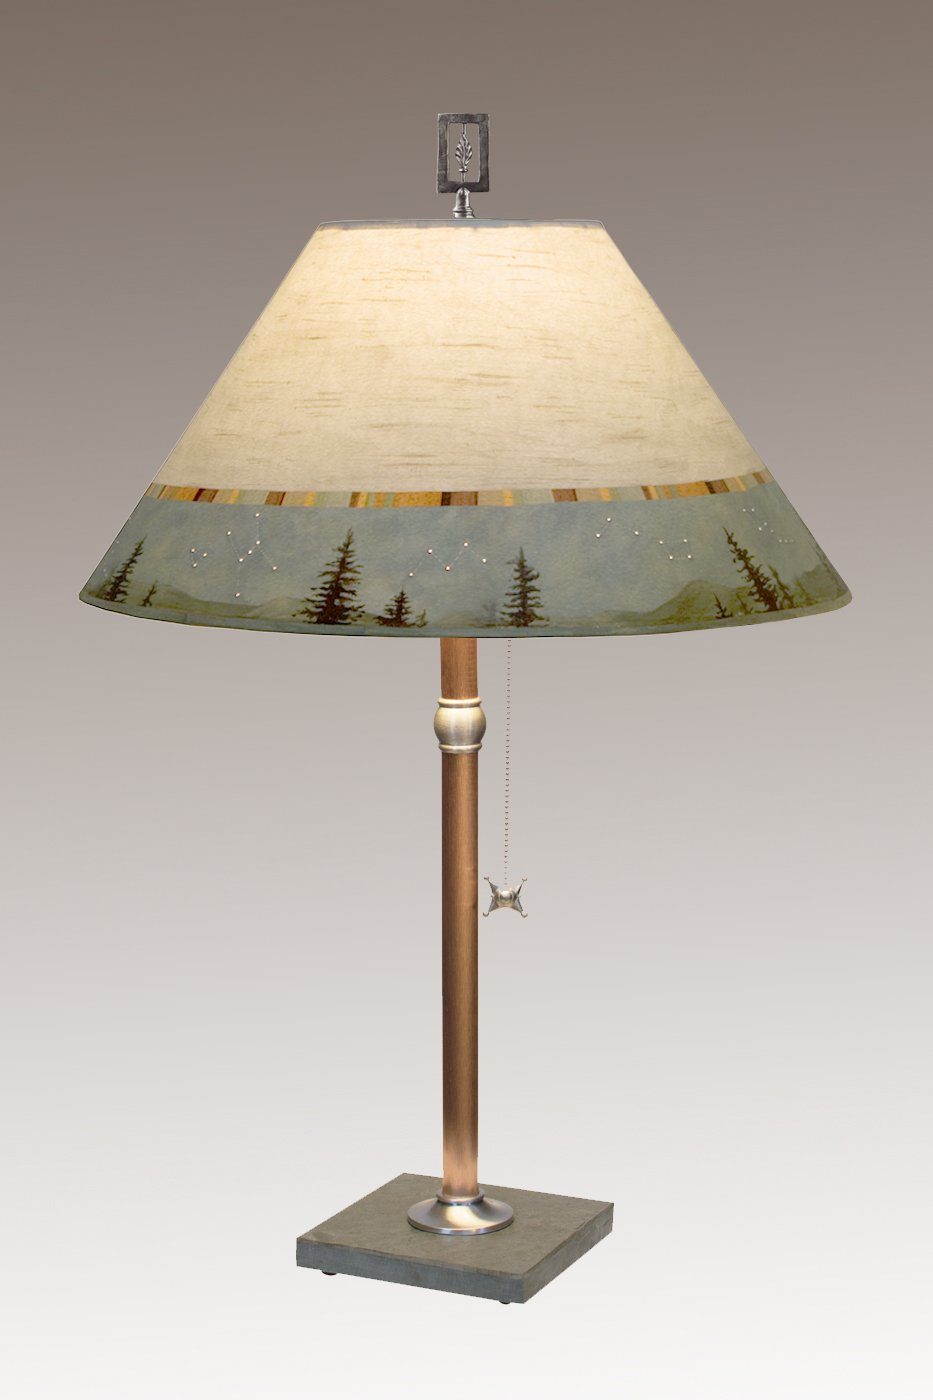 Janna Ugone & Co Table Lamps Copper Table Lamp with Large Conical Shade in Birch Midnight